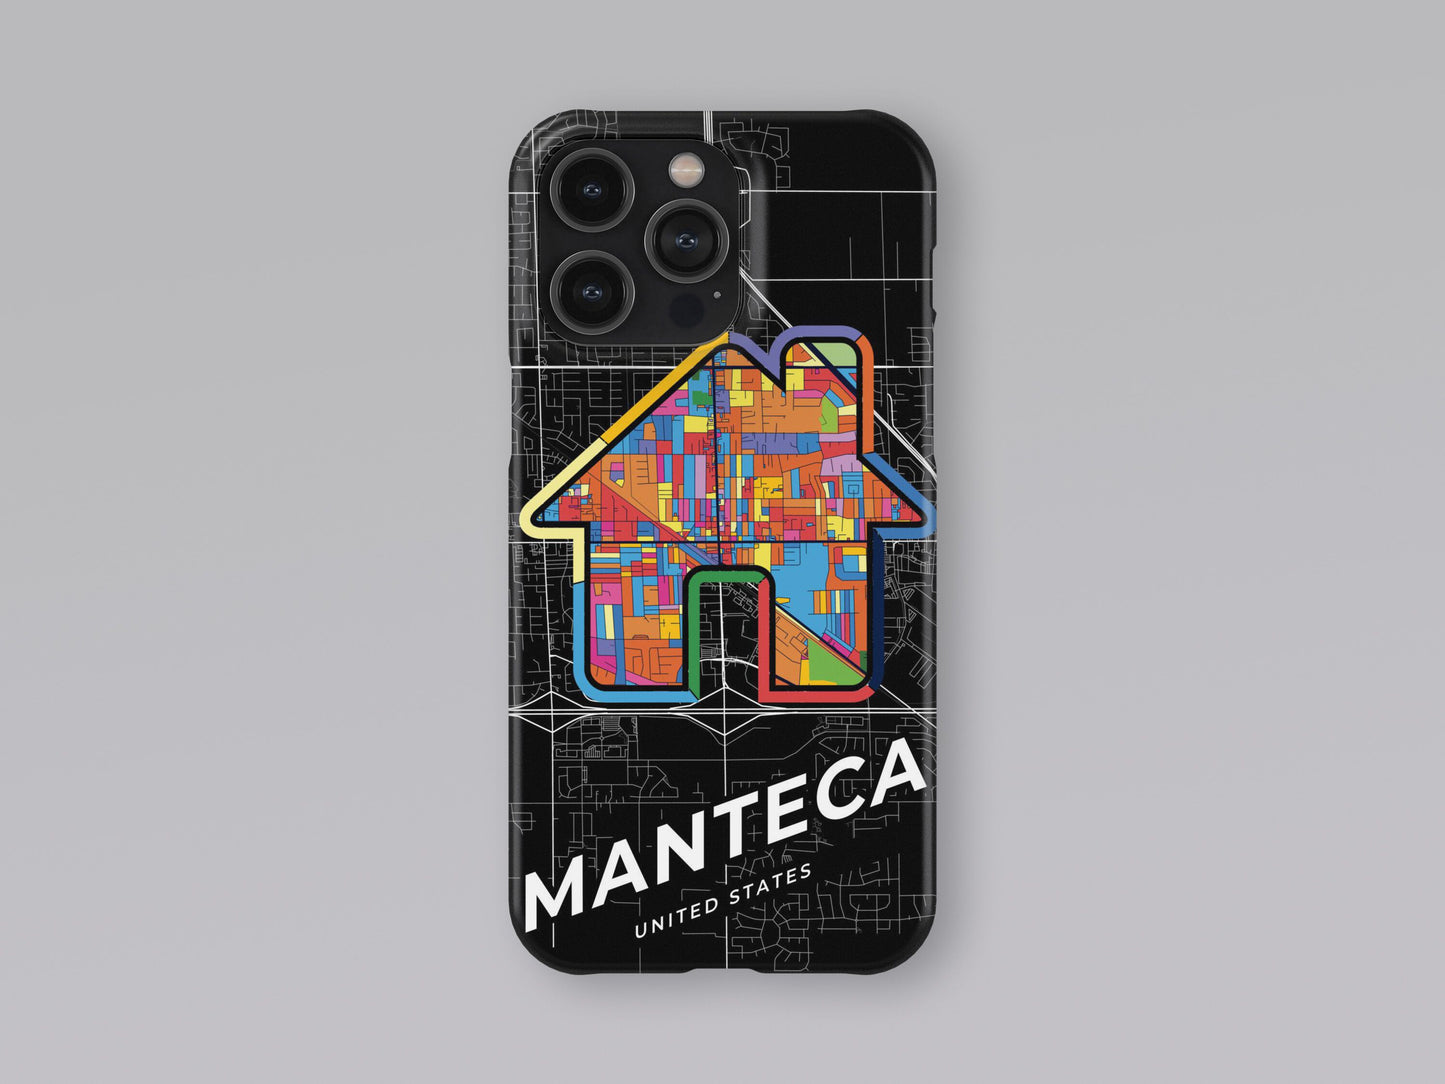 Manteca California slim phone case with colorful icon. Birthday, wedding or housewarming gift. Couple match cases. 3